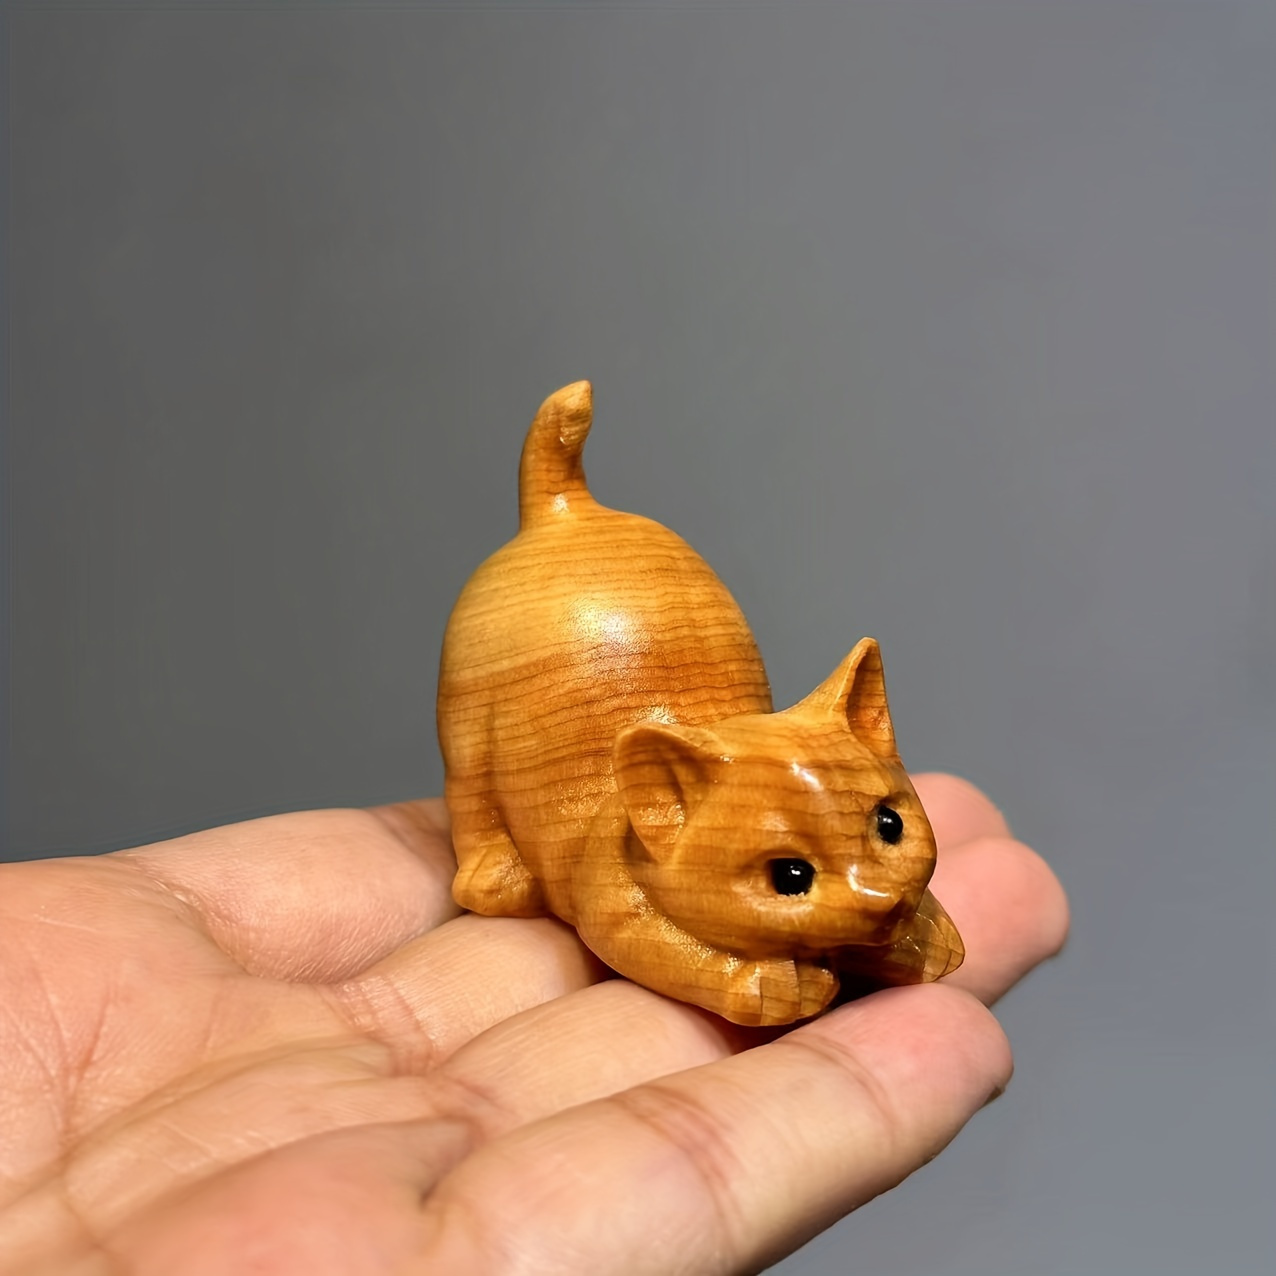 

Handcrafted Wooden Cat Figurine - Artisanal Desktop Ornament, Perfect For Gifts & Home Decor Cat Decor Figurines Home Decor